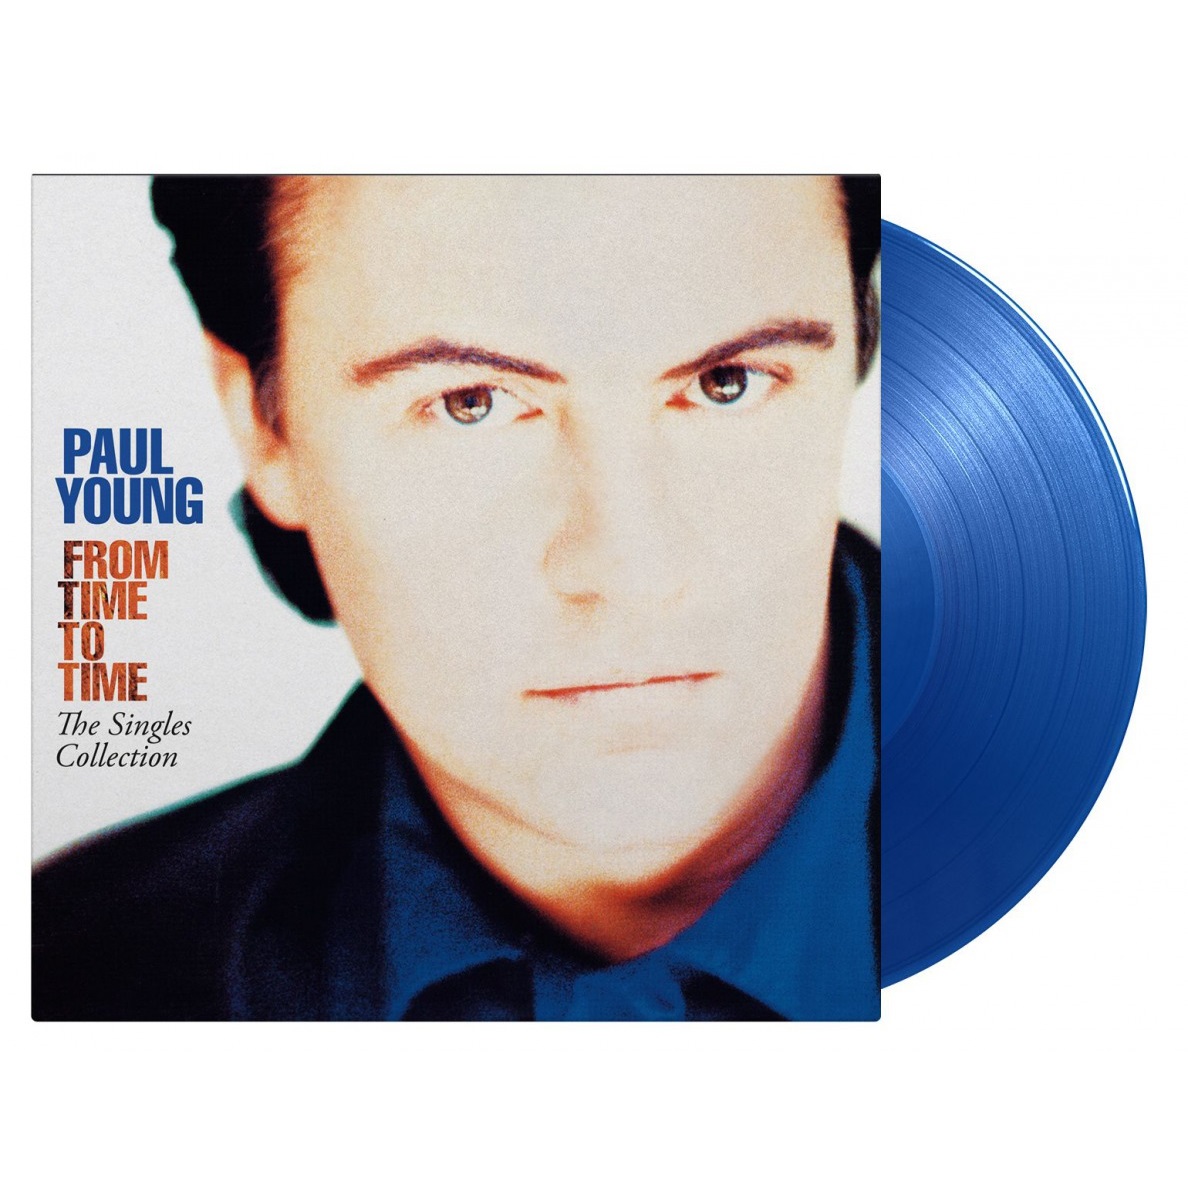 Paul Young (폴 영) - From Time To Time (The Singles Collection) [블루 컬러 2LP]